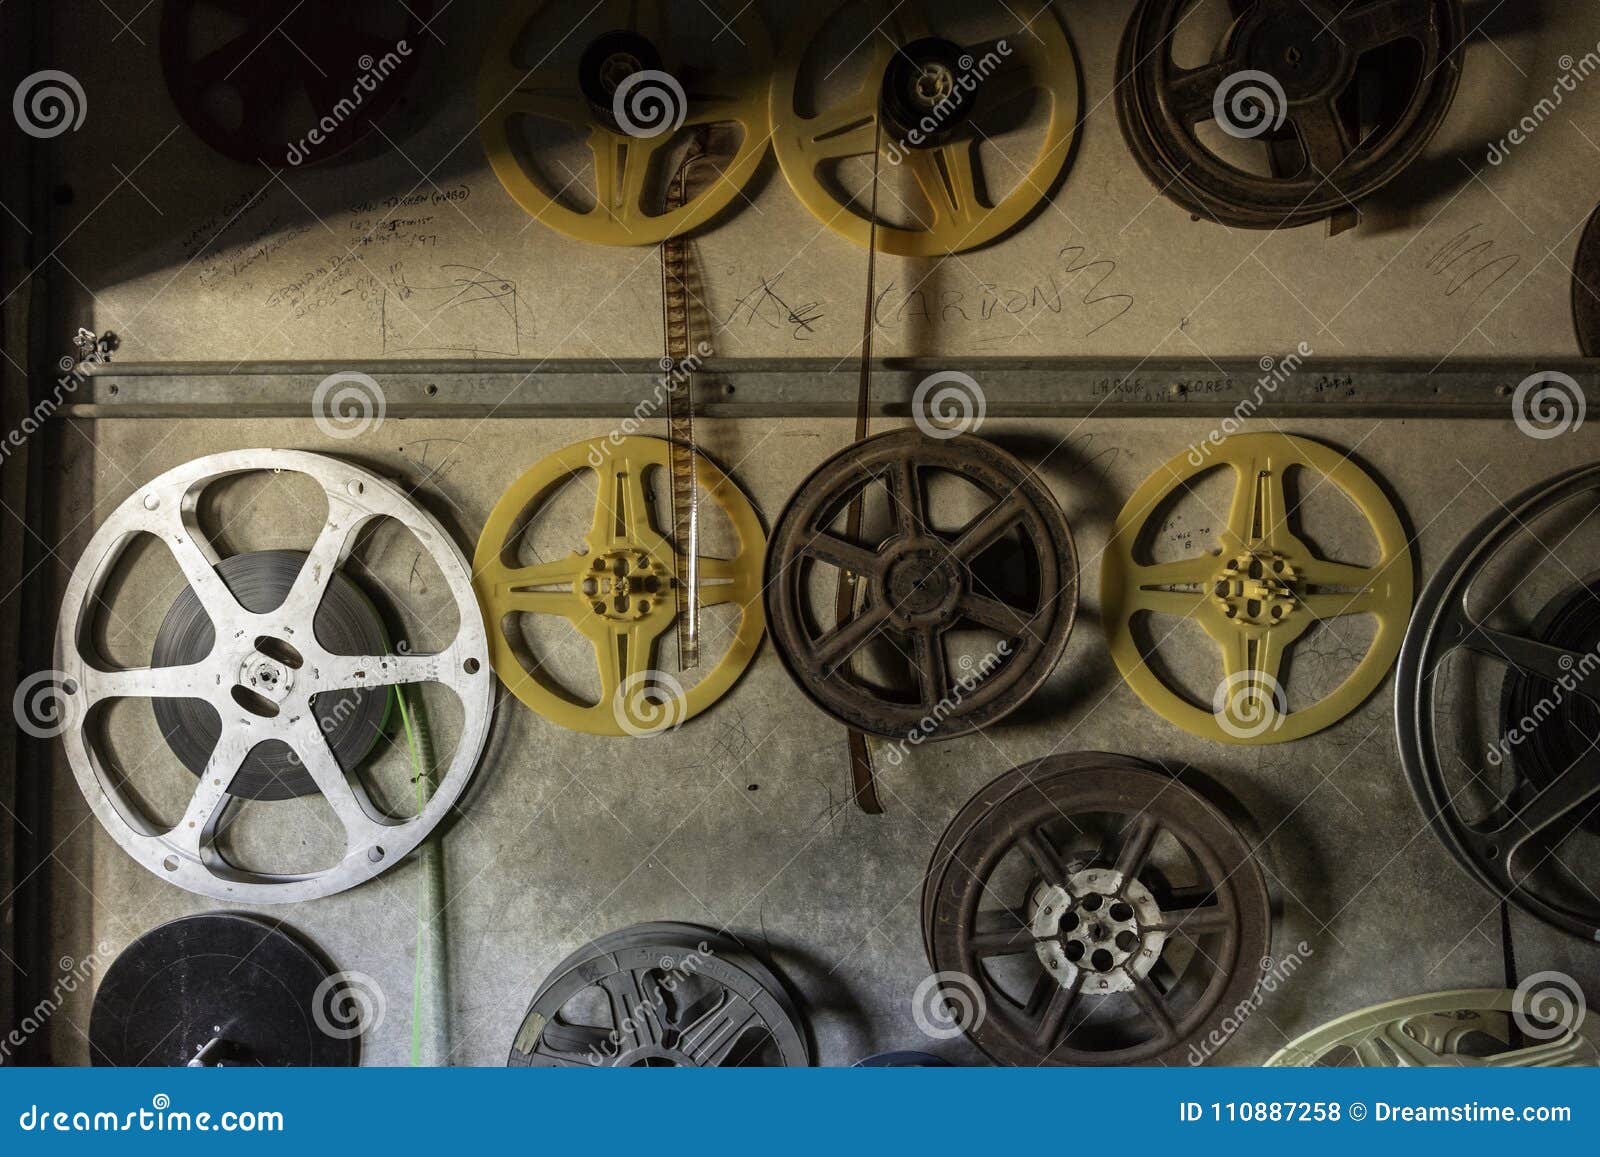 https://thumbs.dreamstime.com/z/collection-vintage-film-reels-old-time-picture-theatre-110887258.jpg